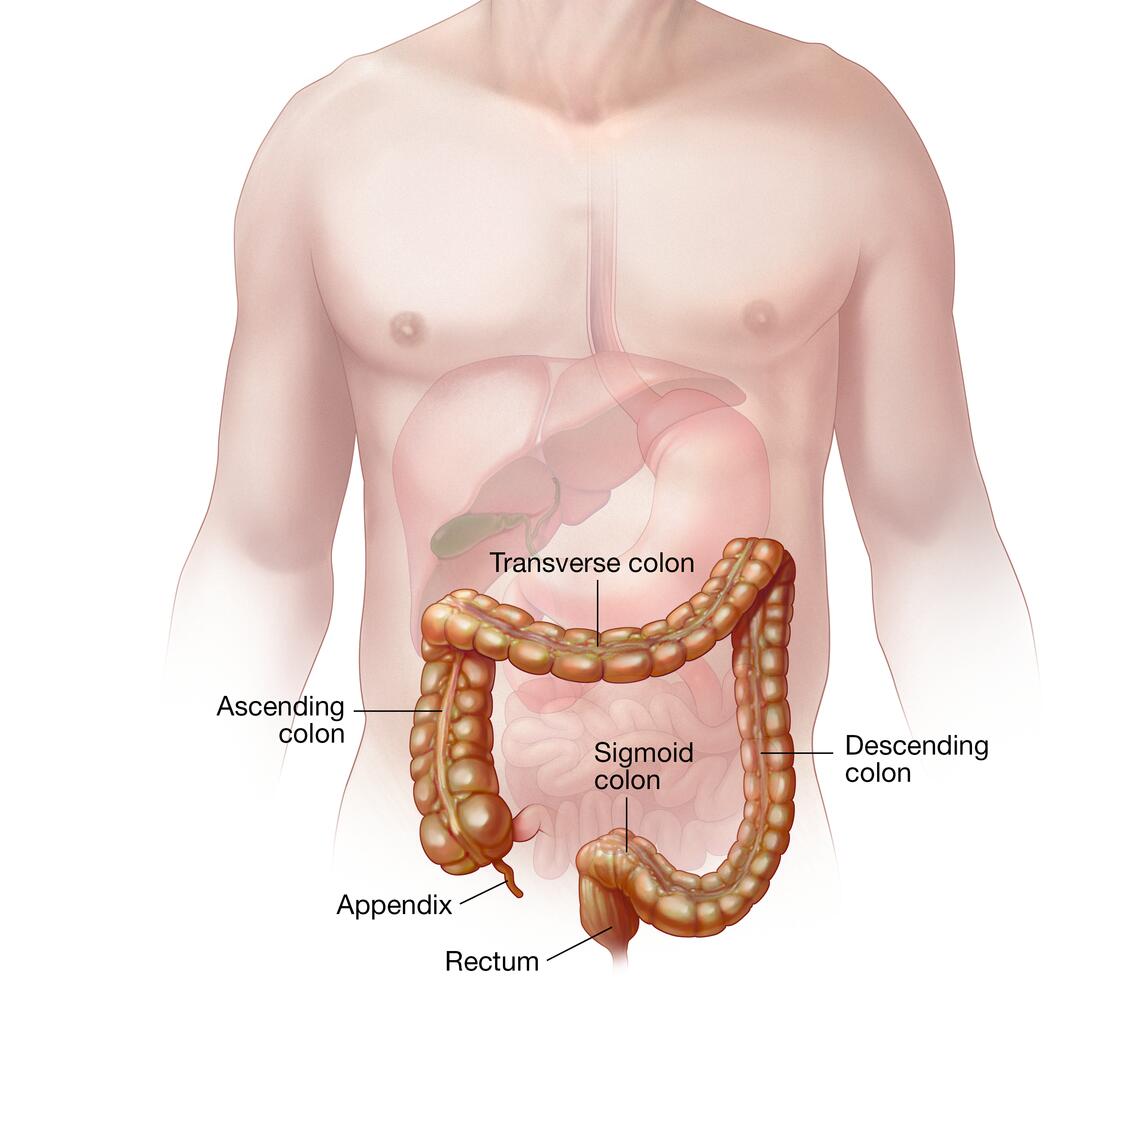 https://www.mayoclinic.org/content/dam/media/en/images/2023/02/09/colon-and-rectum.jpg